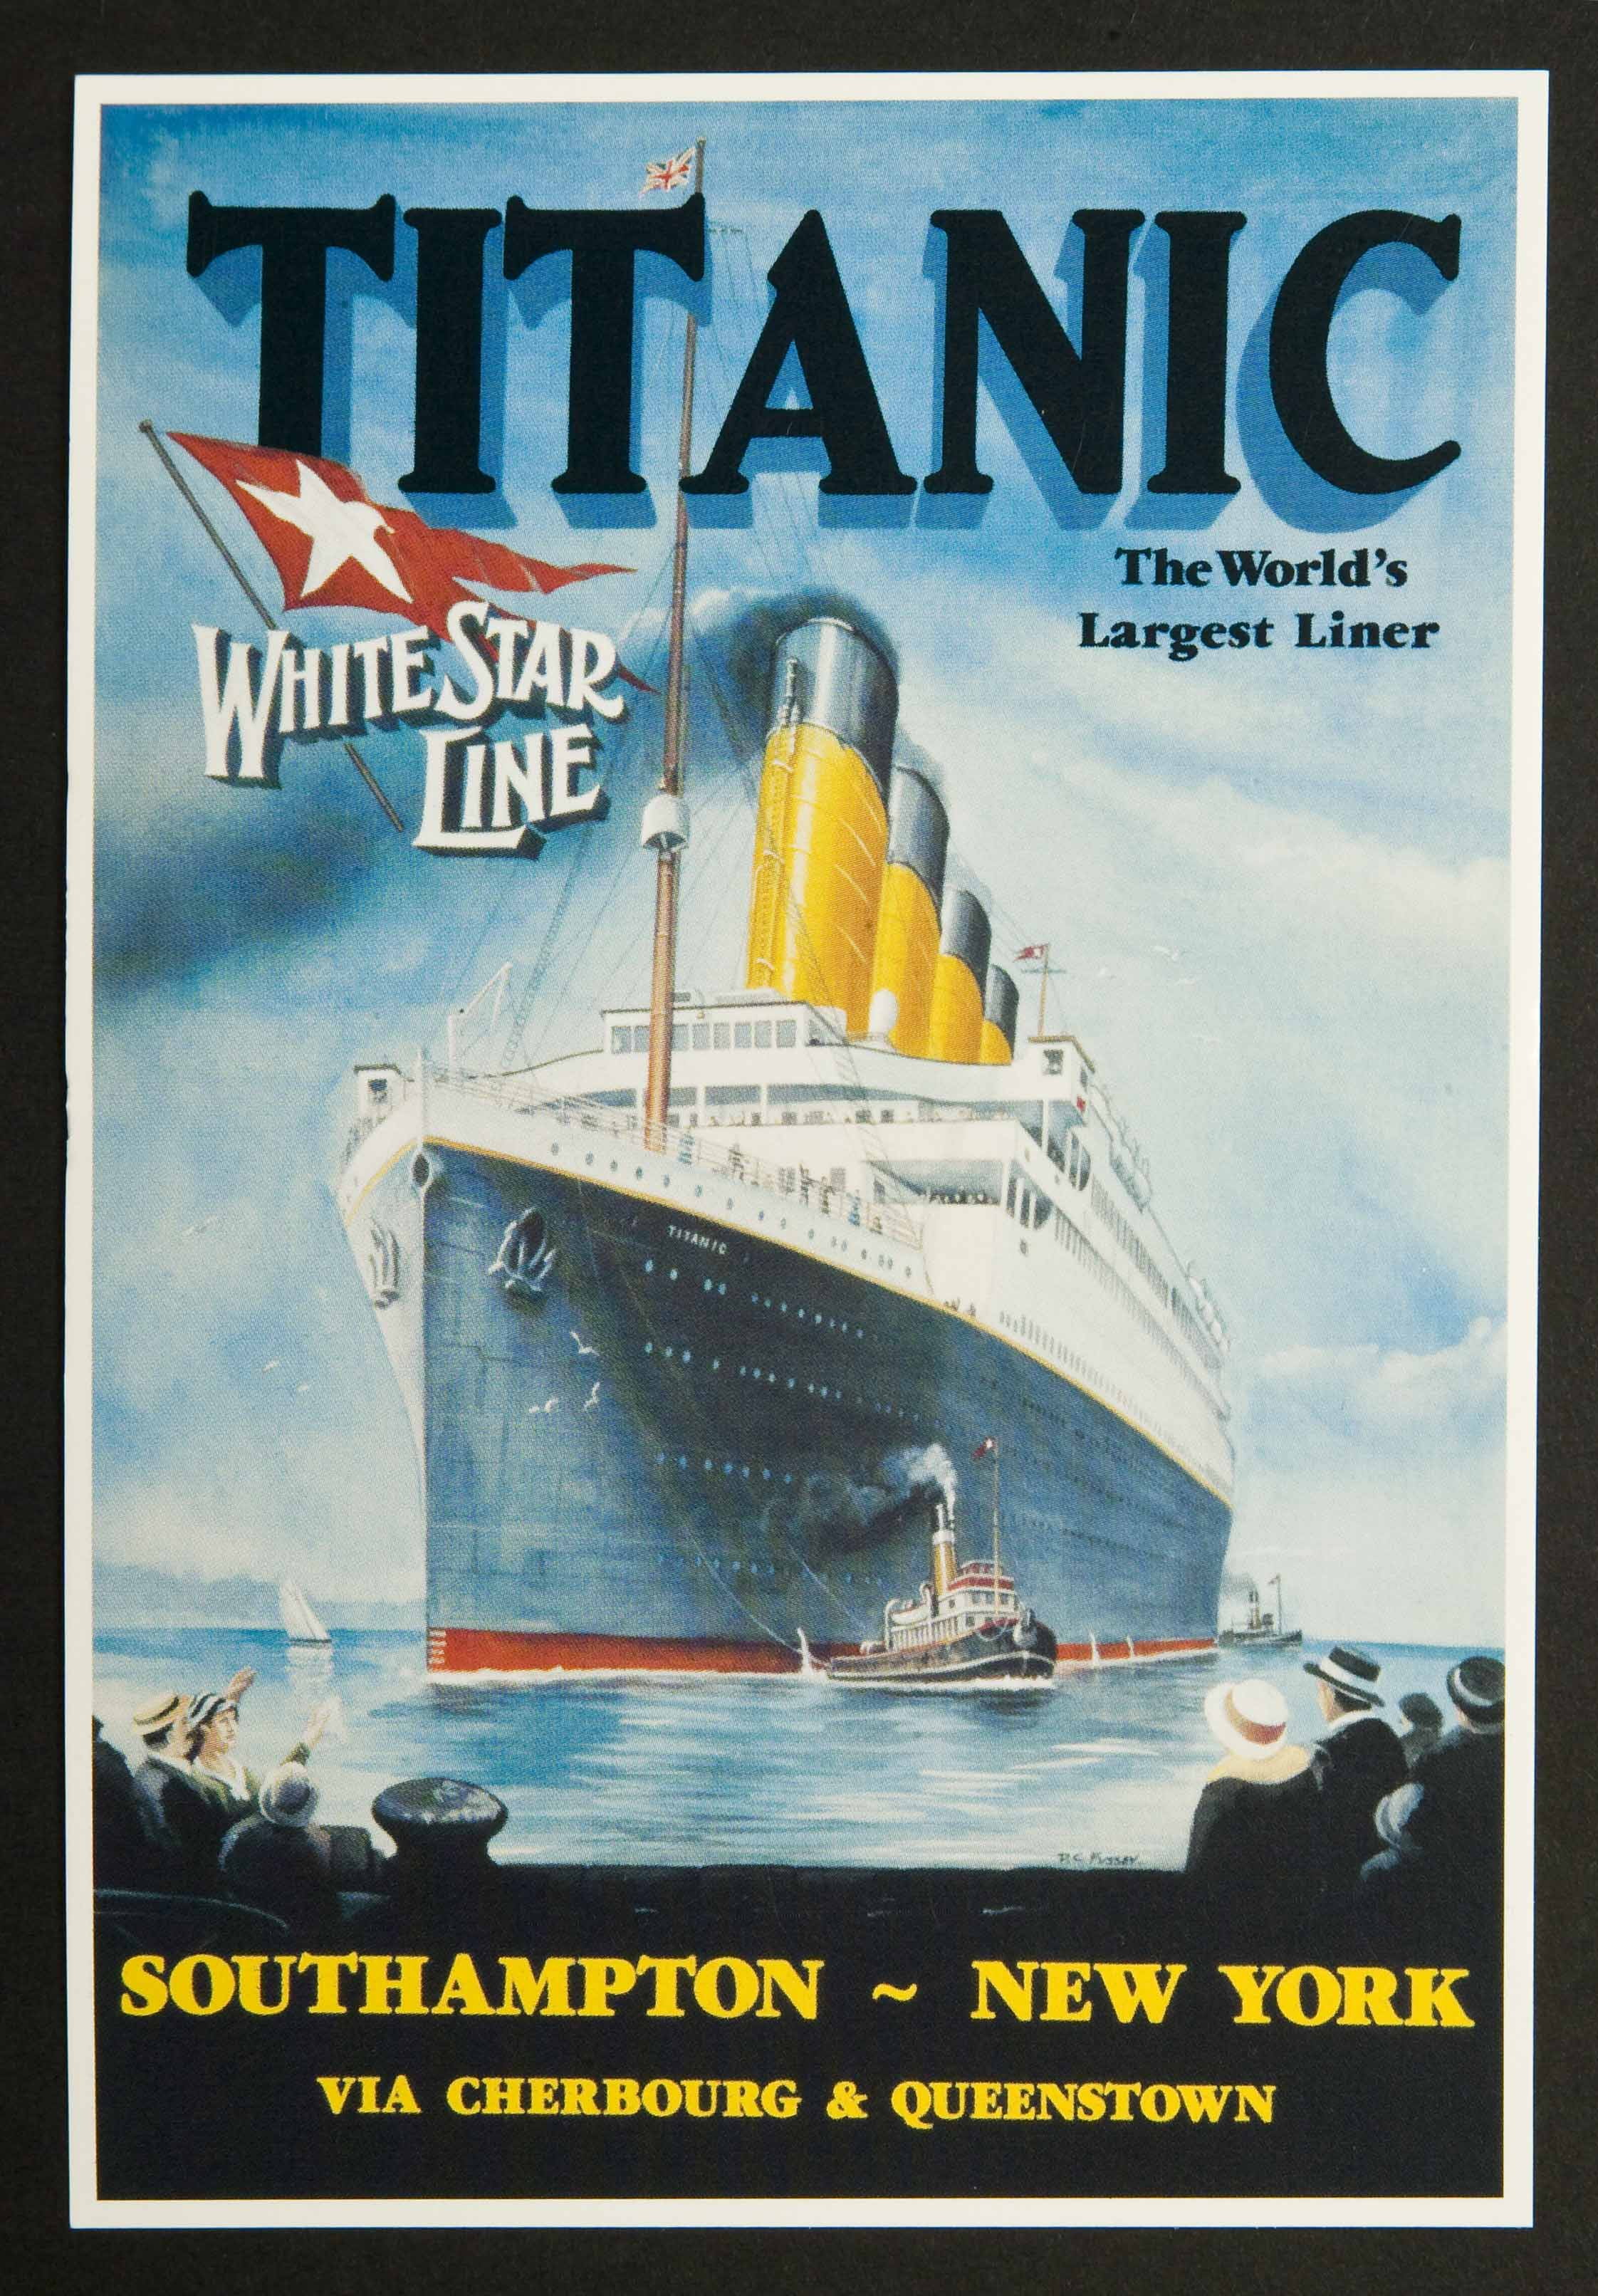 Titanic - The World's Largest Liner Postcards (6) - Click Image to Close